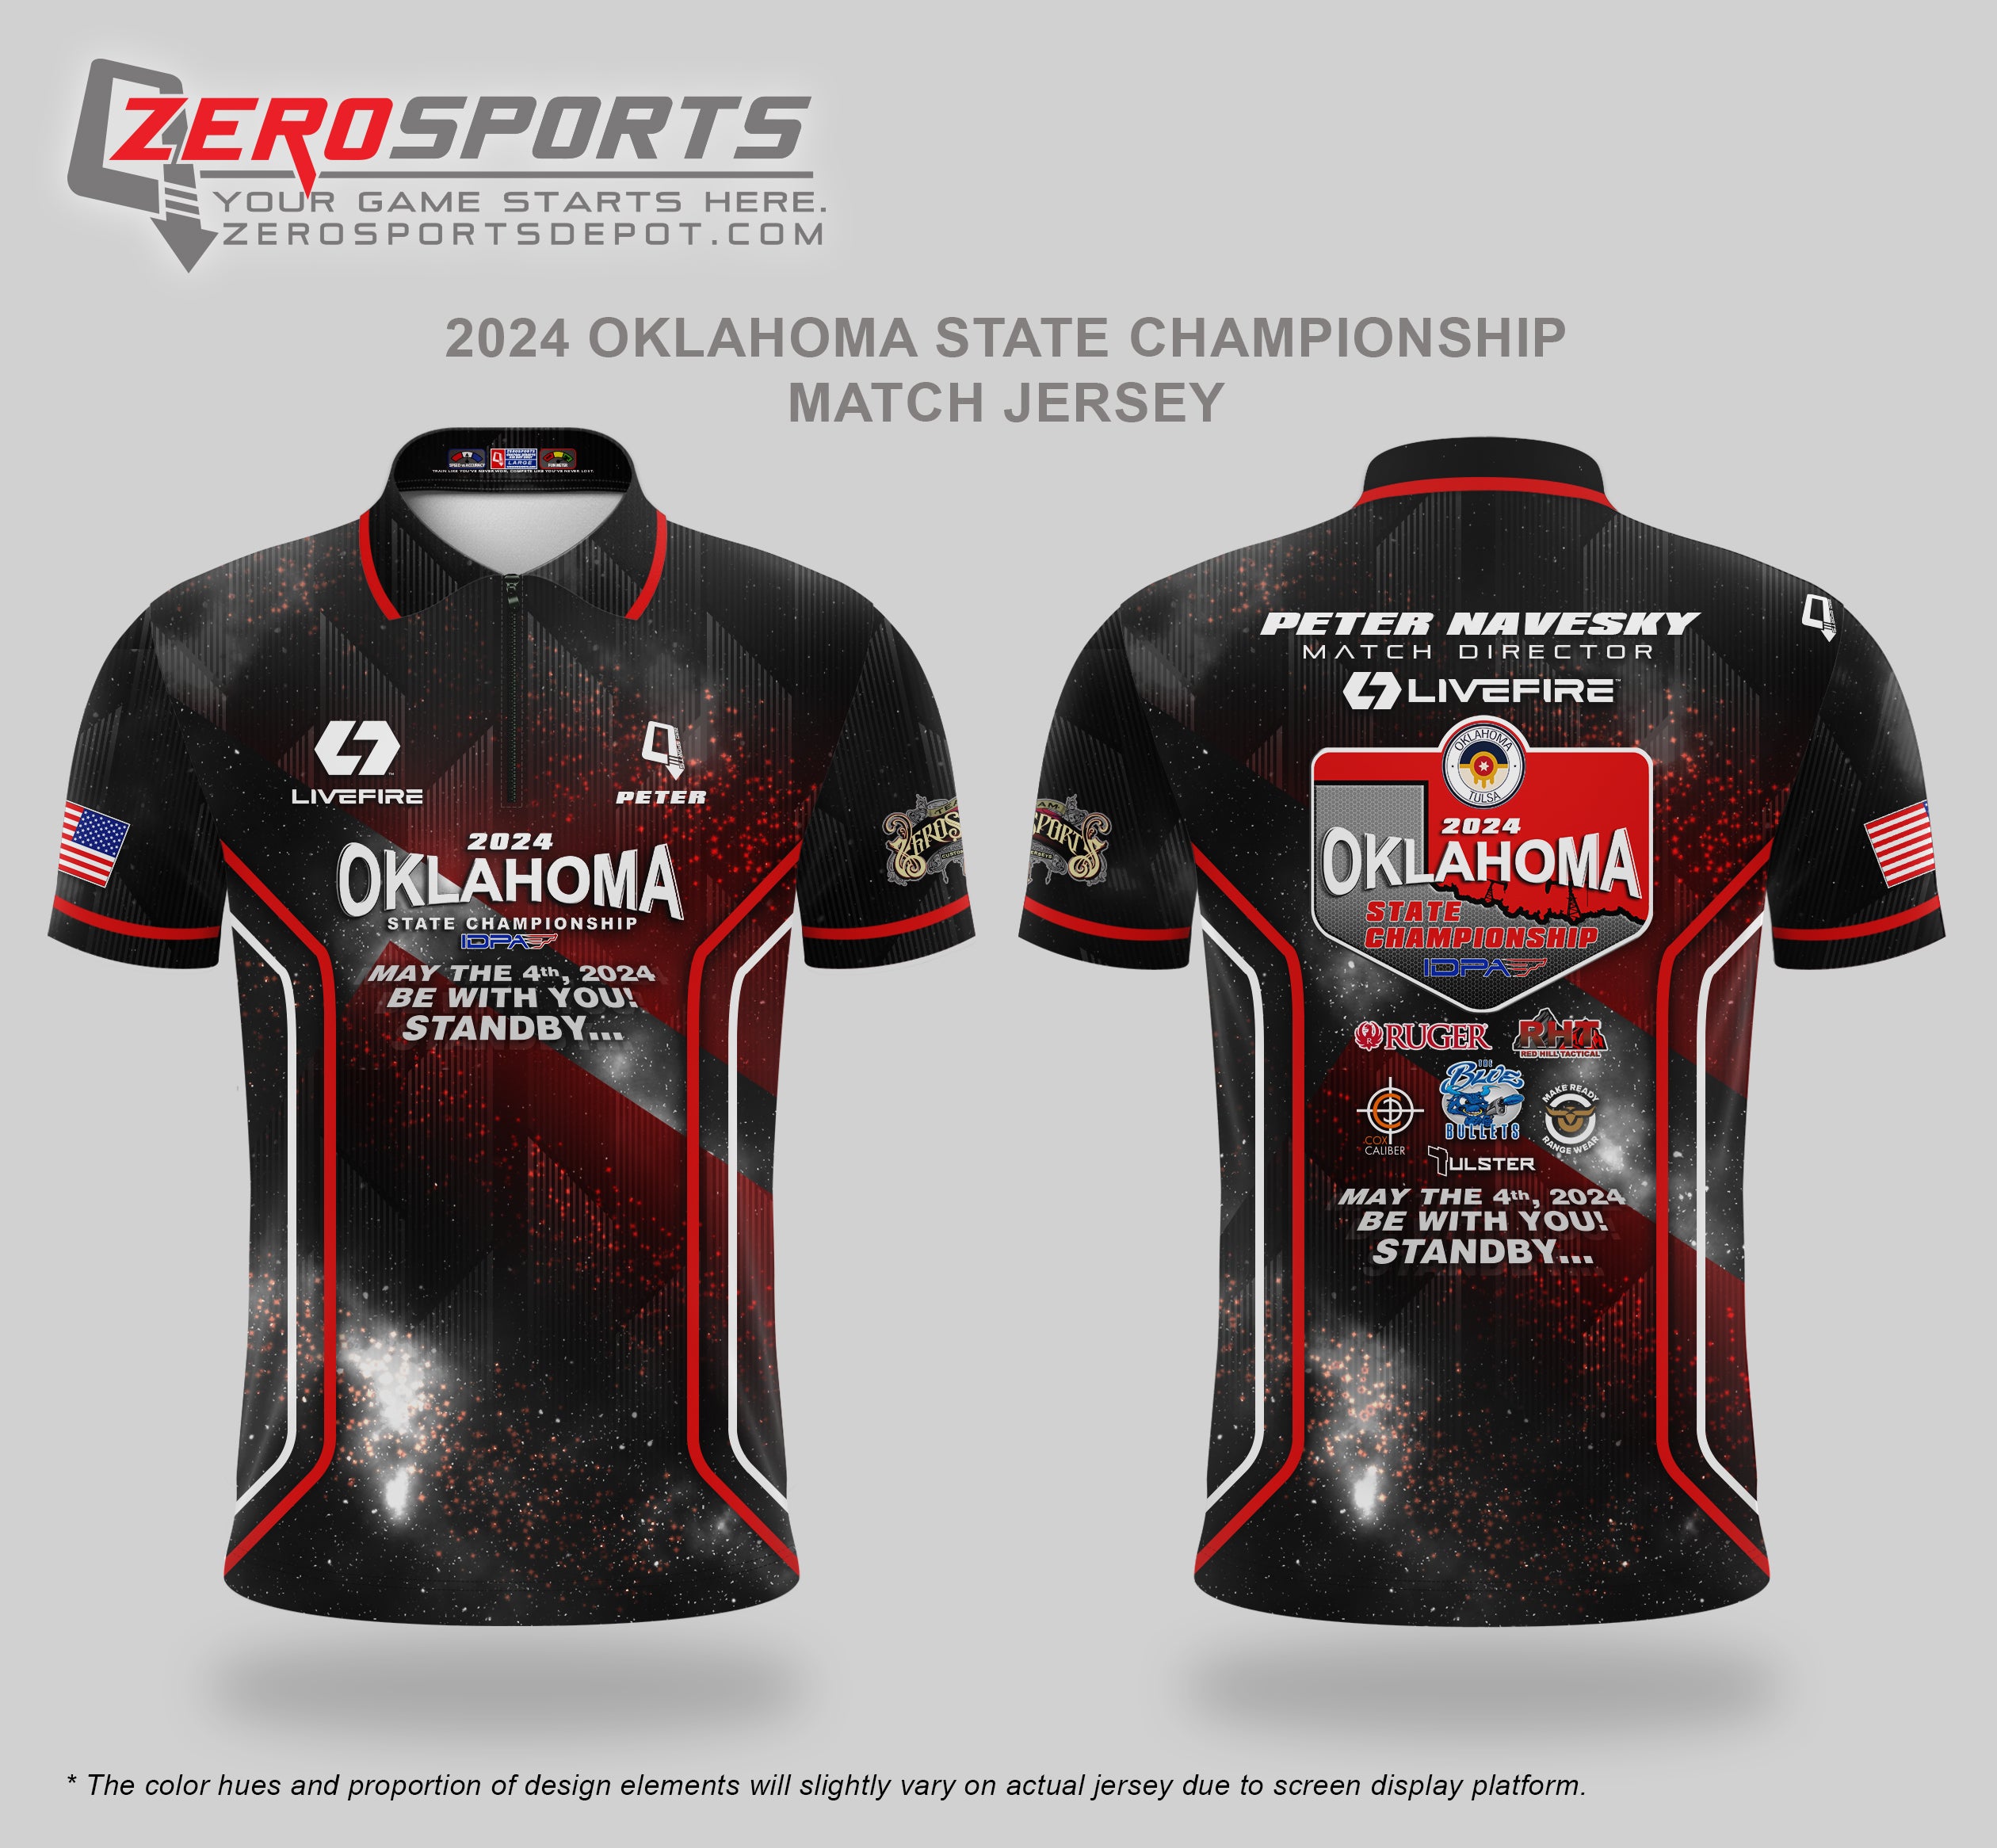 2024 Oklahoma State IDPA Championship Match Jersey  **All orders after 3/24/2024 will be shipped directly to your address after the match.